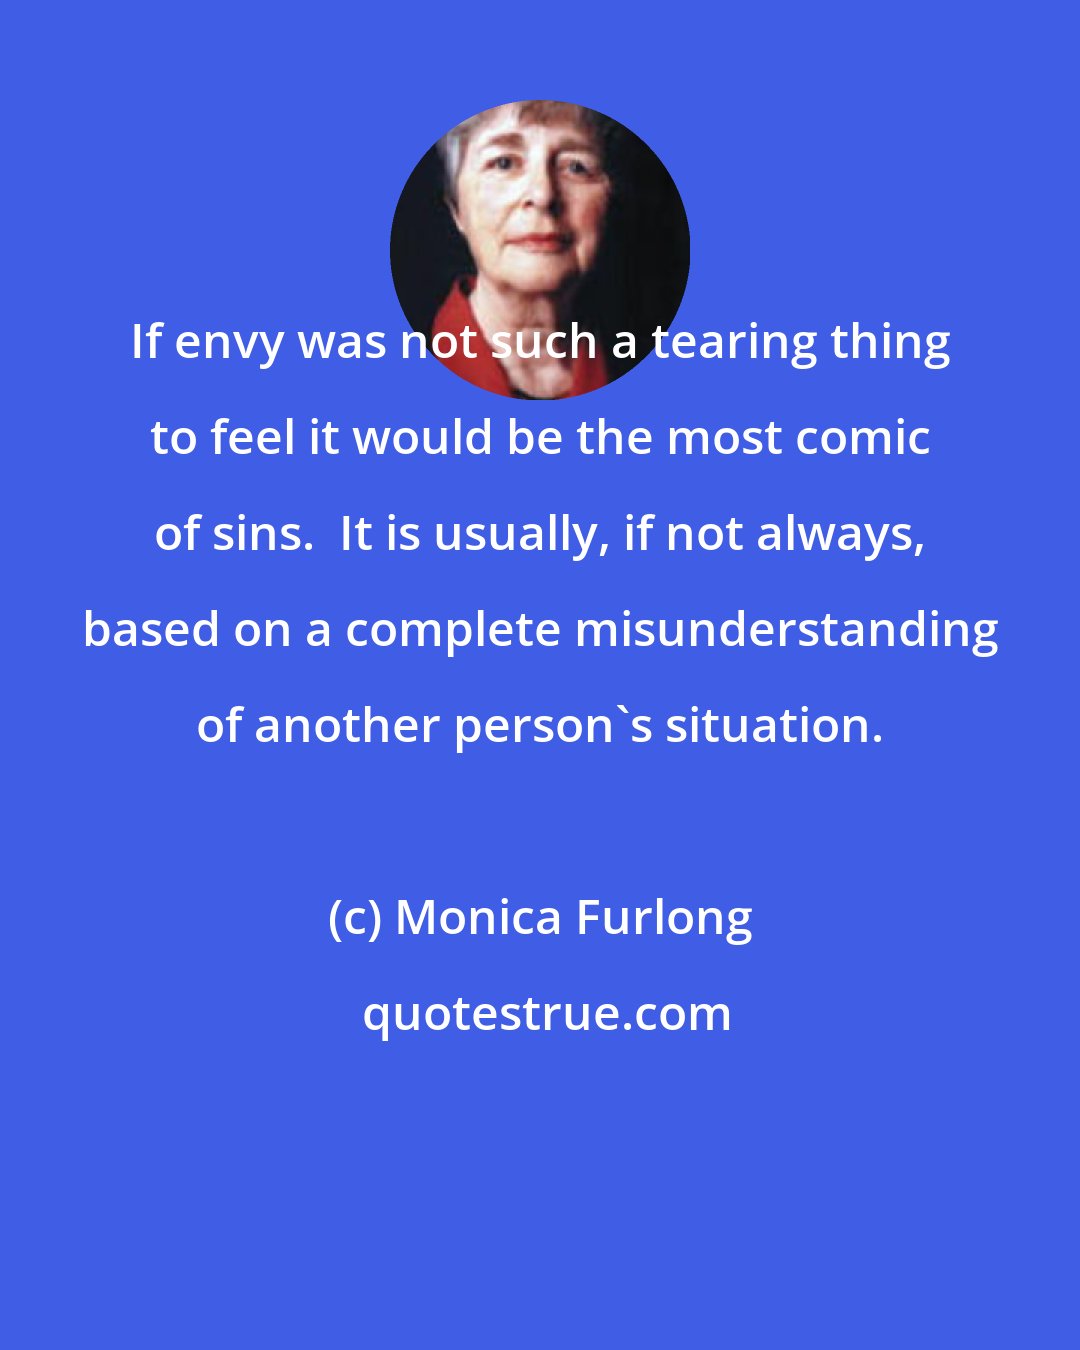 Monica Furlong: If envy was not such a tearing thing to feel it would be the most comic of sins.  It is usually, if not always, based on a complete misunderstanding of another person's situation.